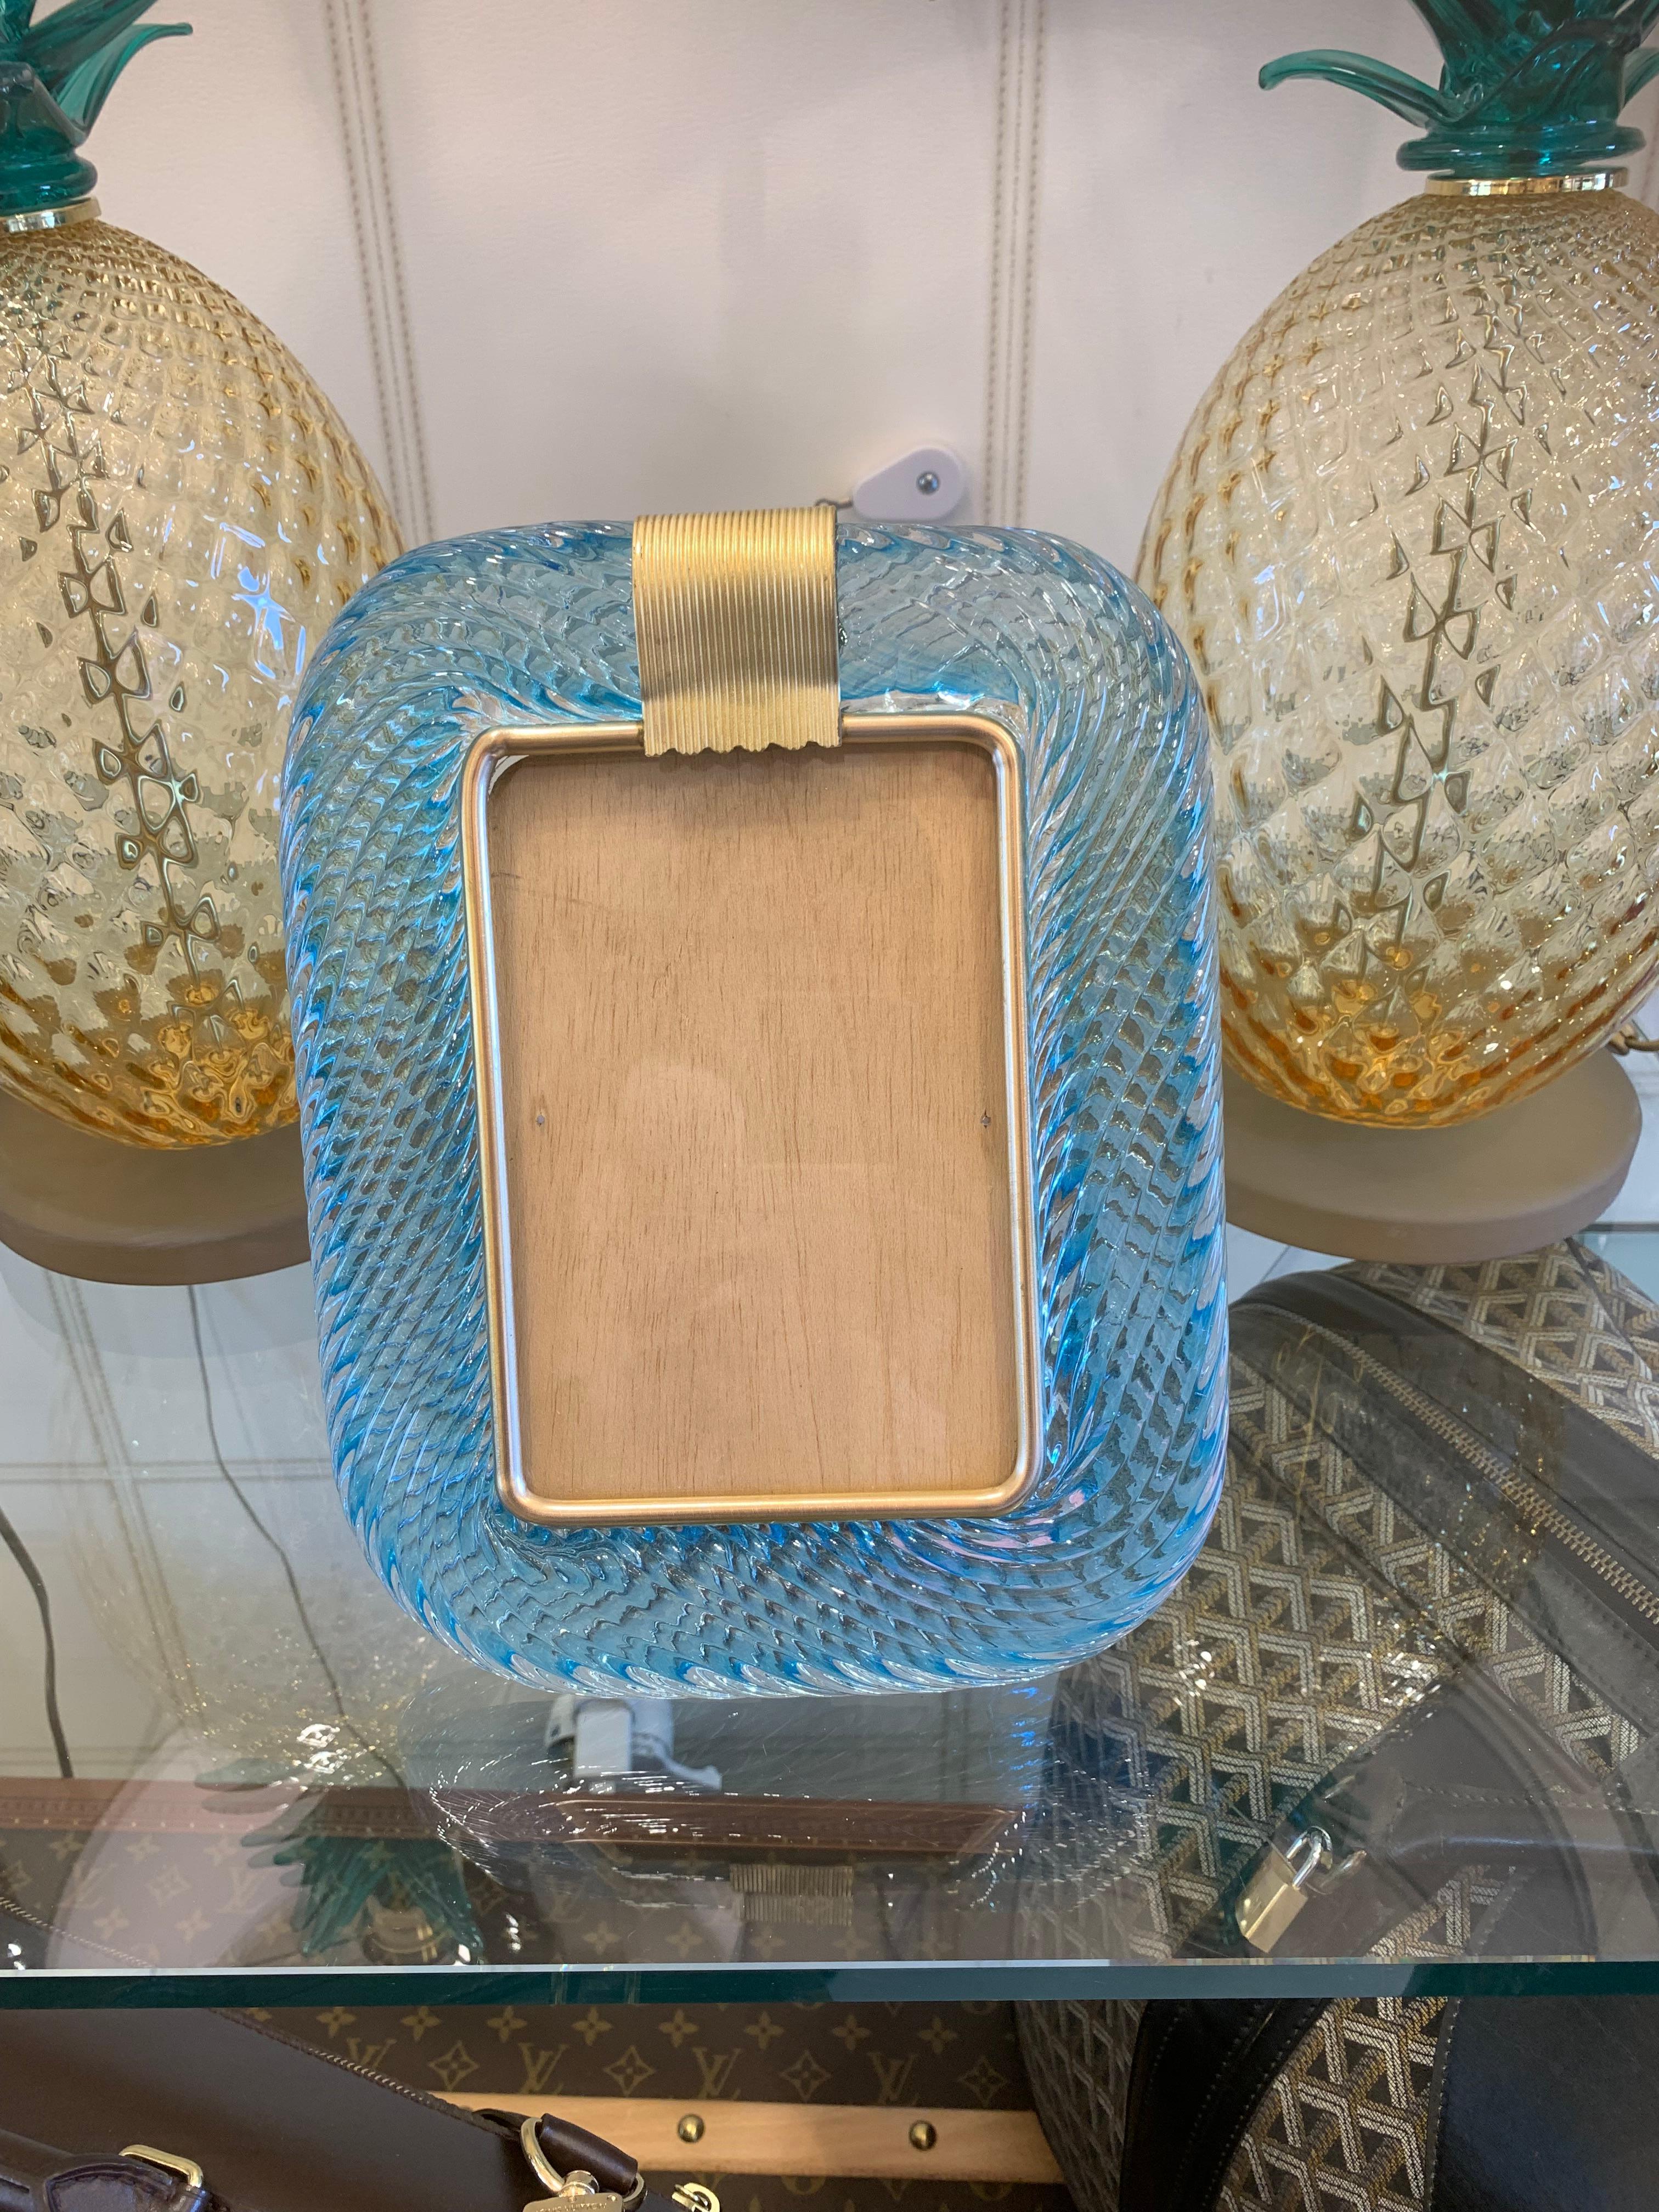 2000's Sky Blue Twisted Murano Glass and Brass Photo Frame by Barovier e Toso For Sale 8